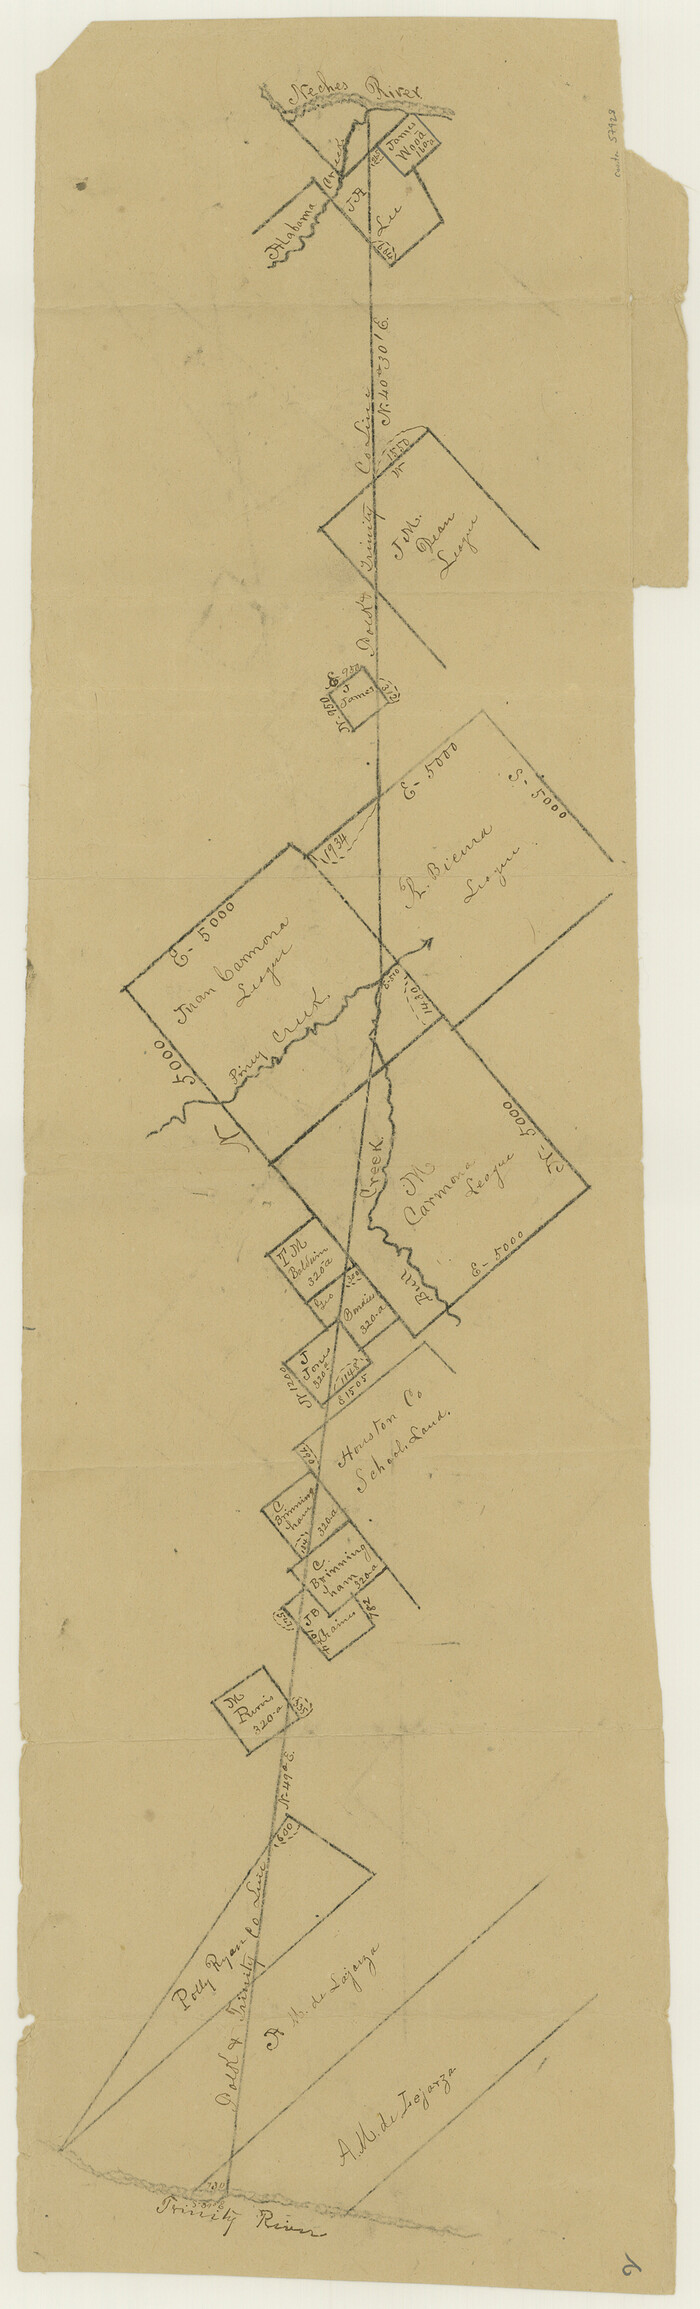 57928, Polk County Boundary File 2a, General Map Collection